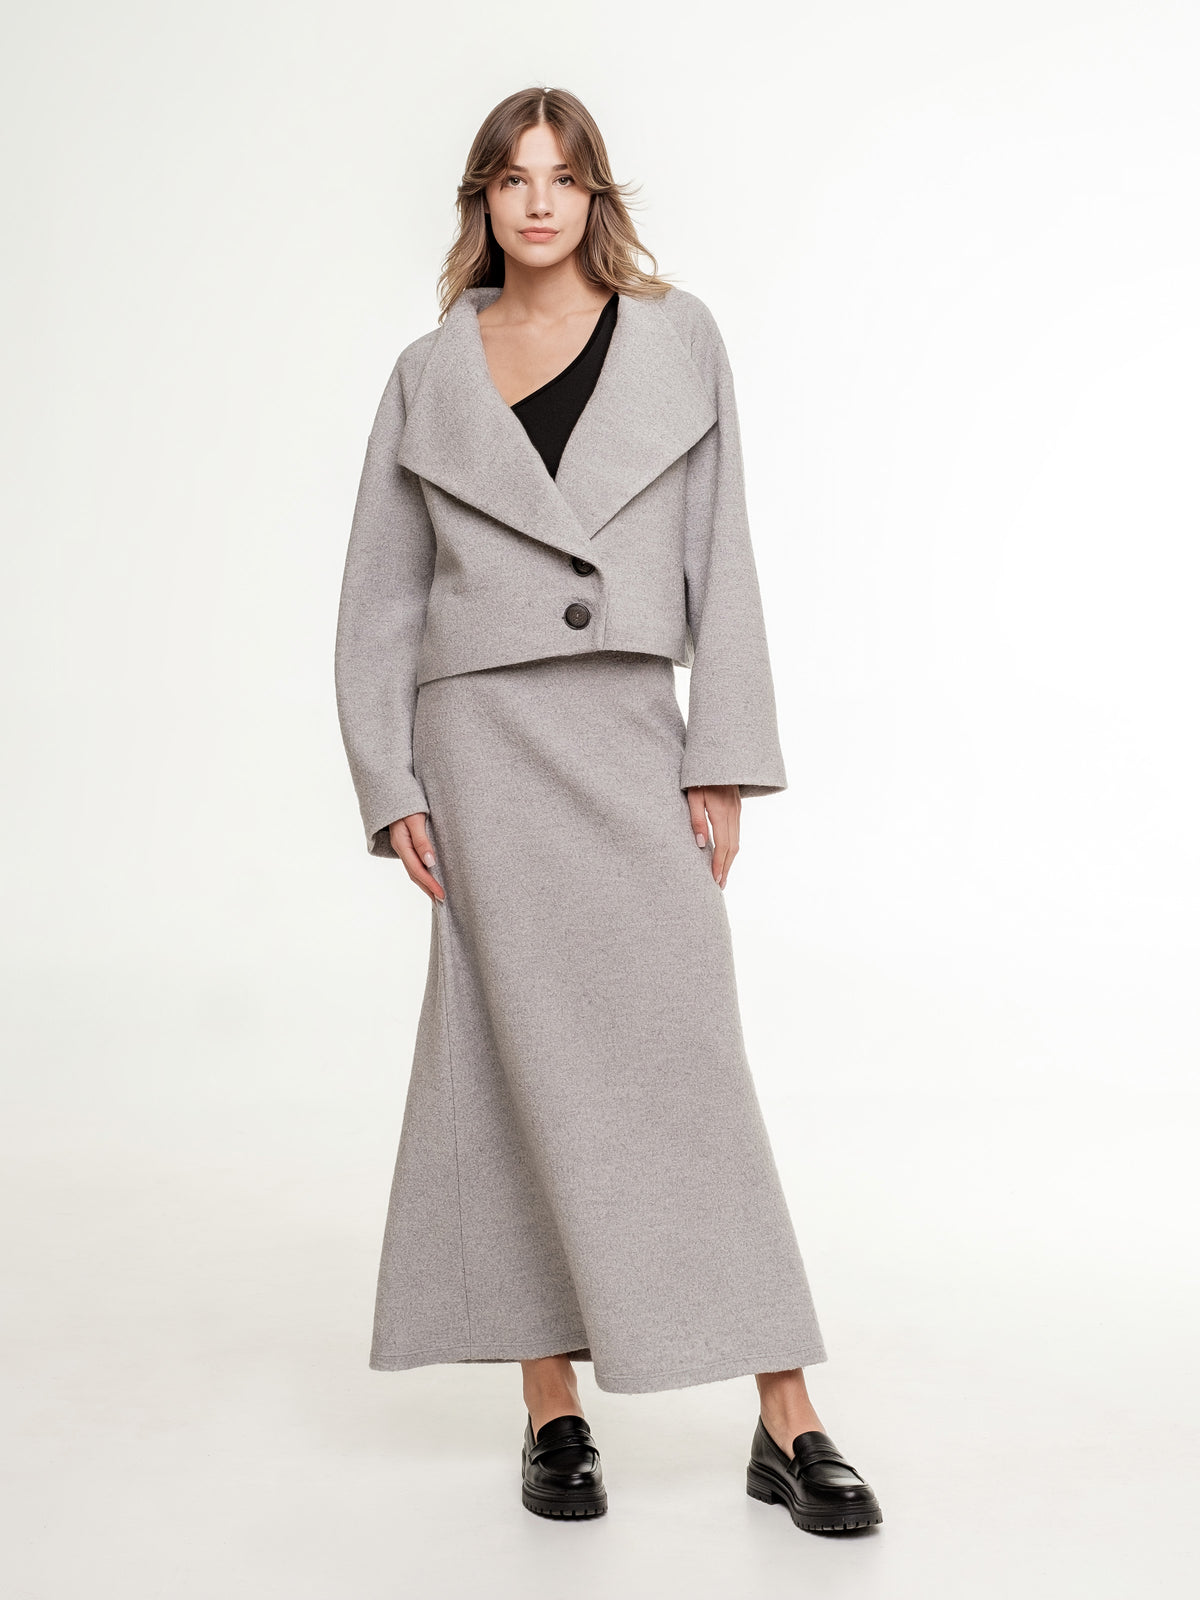 light_grey_wool_set_jacket_and_long_A-shaped_skirt_view_from_the_front